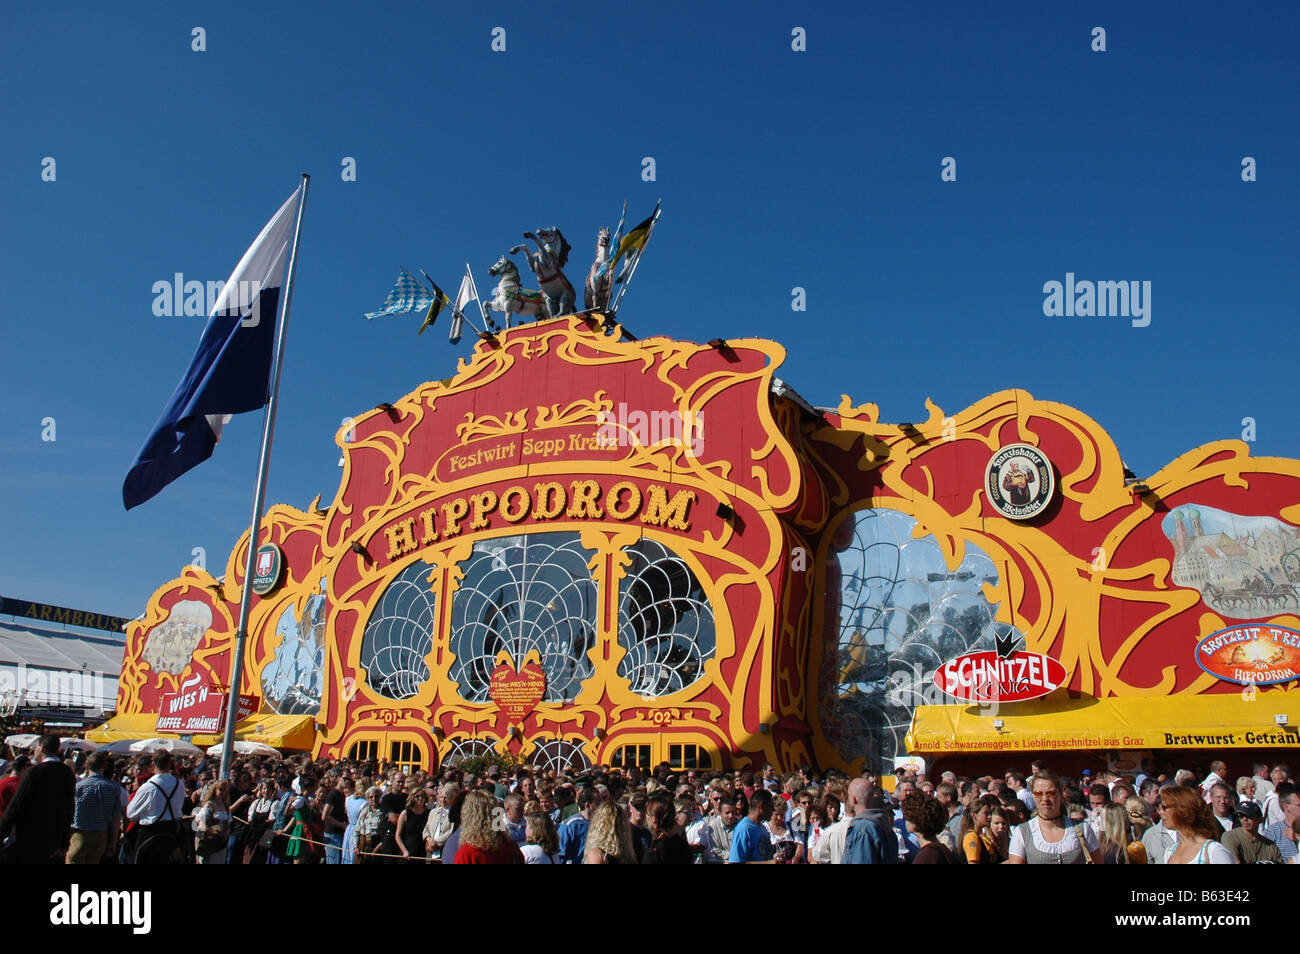 Oktoberfest Hippodrom Beer Tent on the Opening Day of the Festival Stock Photo